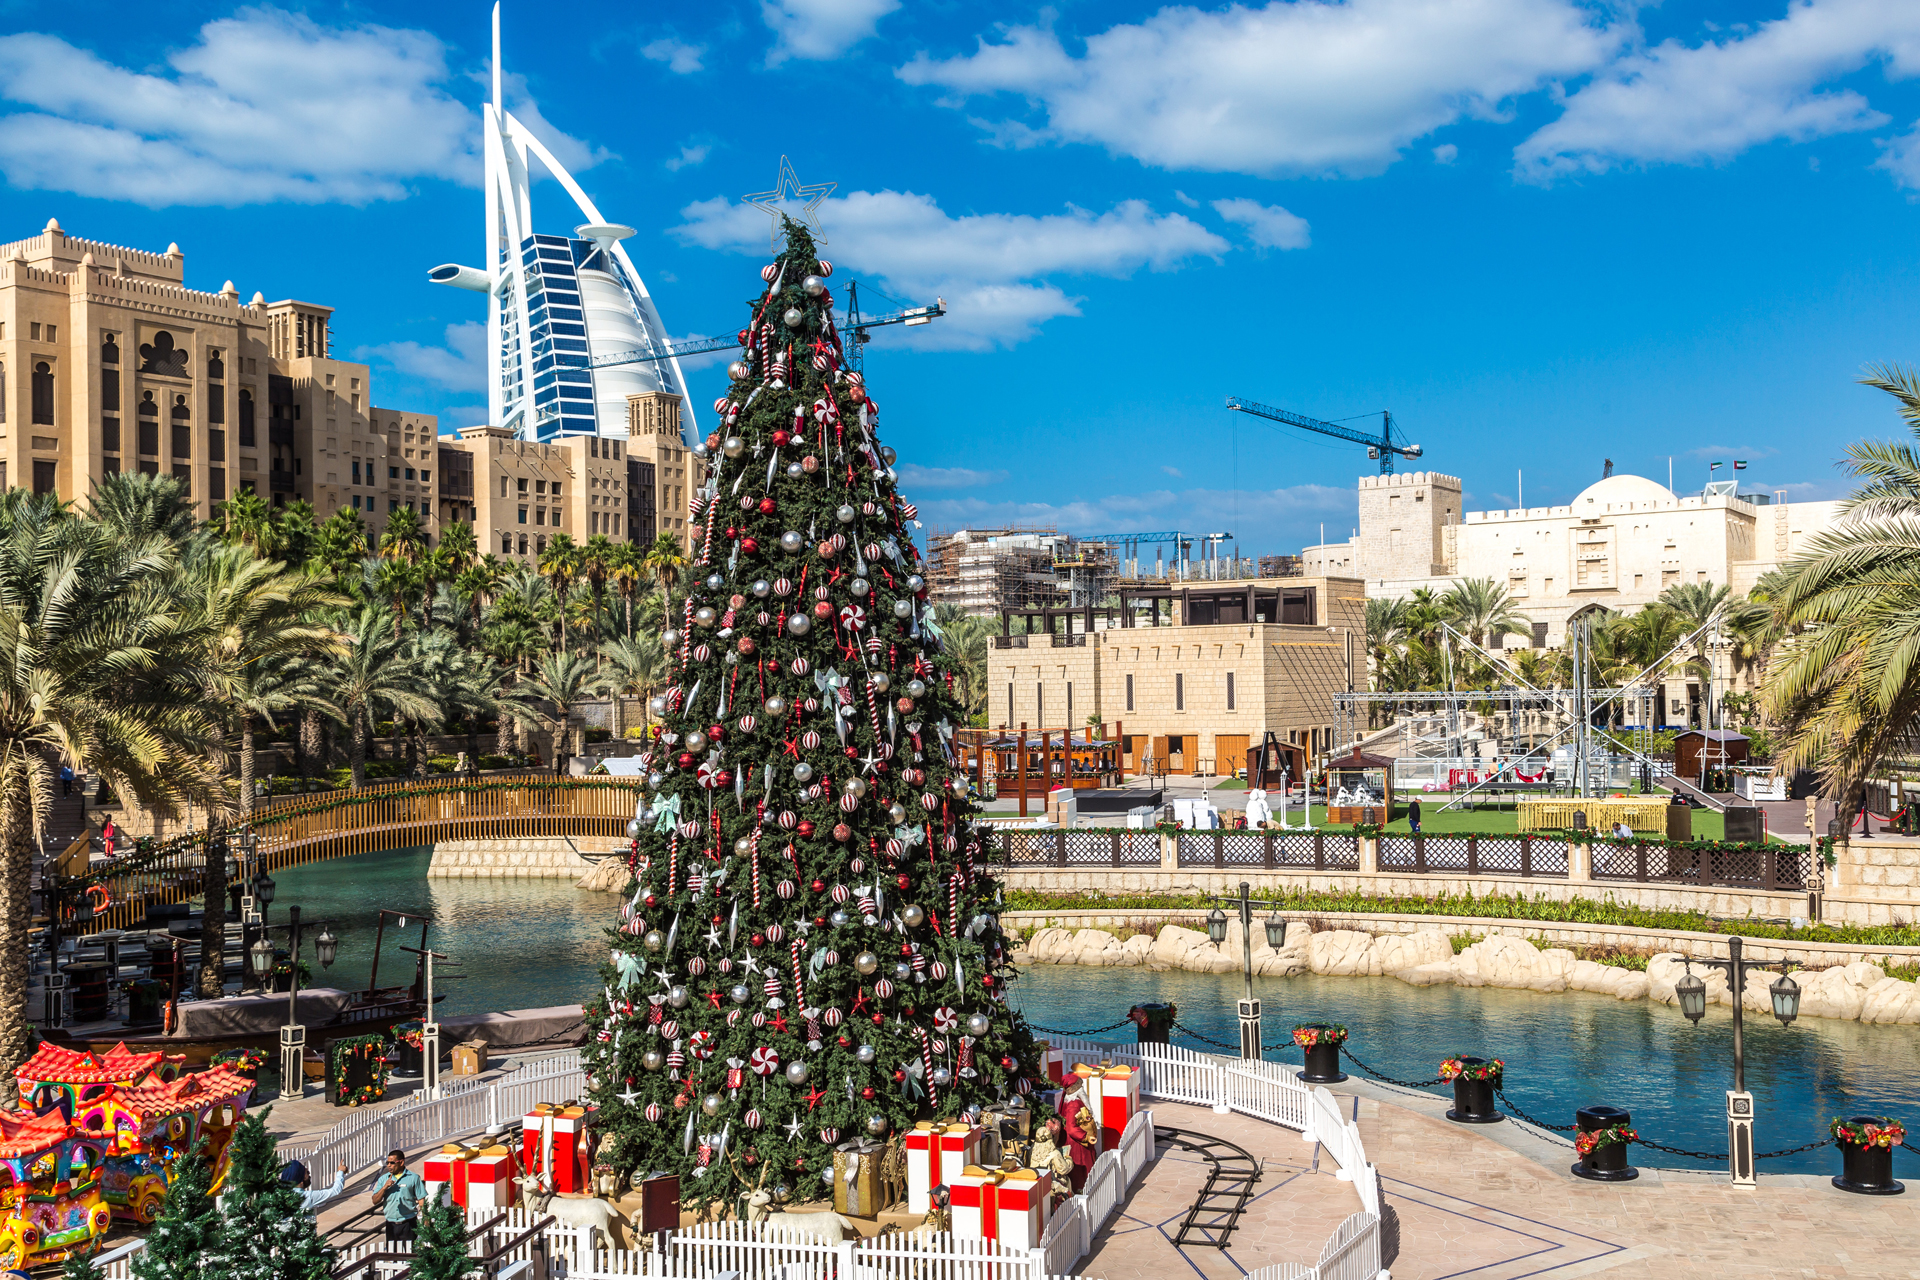 Big sale and 'snow' in Dubai this festive weekend